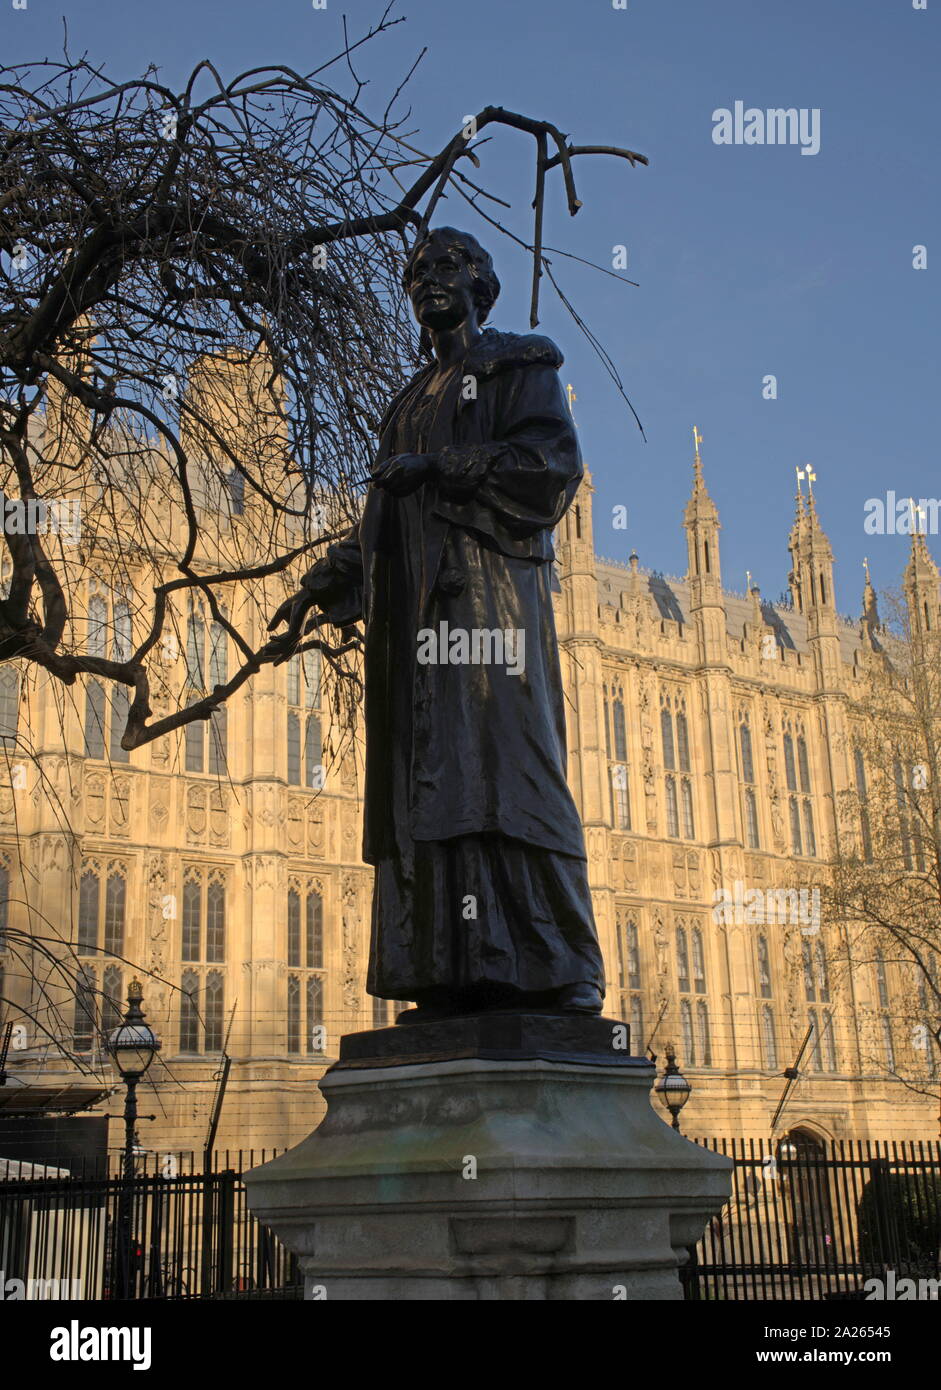 The Emmeline and Christabel Pankhurst Memorial, is a memorial to Emmeline Pankhurst a British suffragette, and her daughter Christabel. It stands at the entrance to Victoria Tower Gardens, south of Victoria Tower at the southwest corner of the Palace of Westminster. bronze statue of Emmeline Pankhurst by Arthur George Walker, unveiled in 1930. In 1958 the statue was relocated to its current site and the bronze reliefs commemorating Christabel Pankhurst were added. Stock Photo